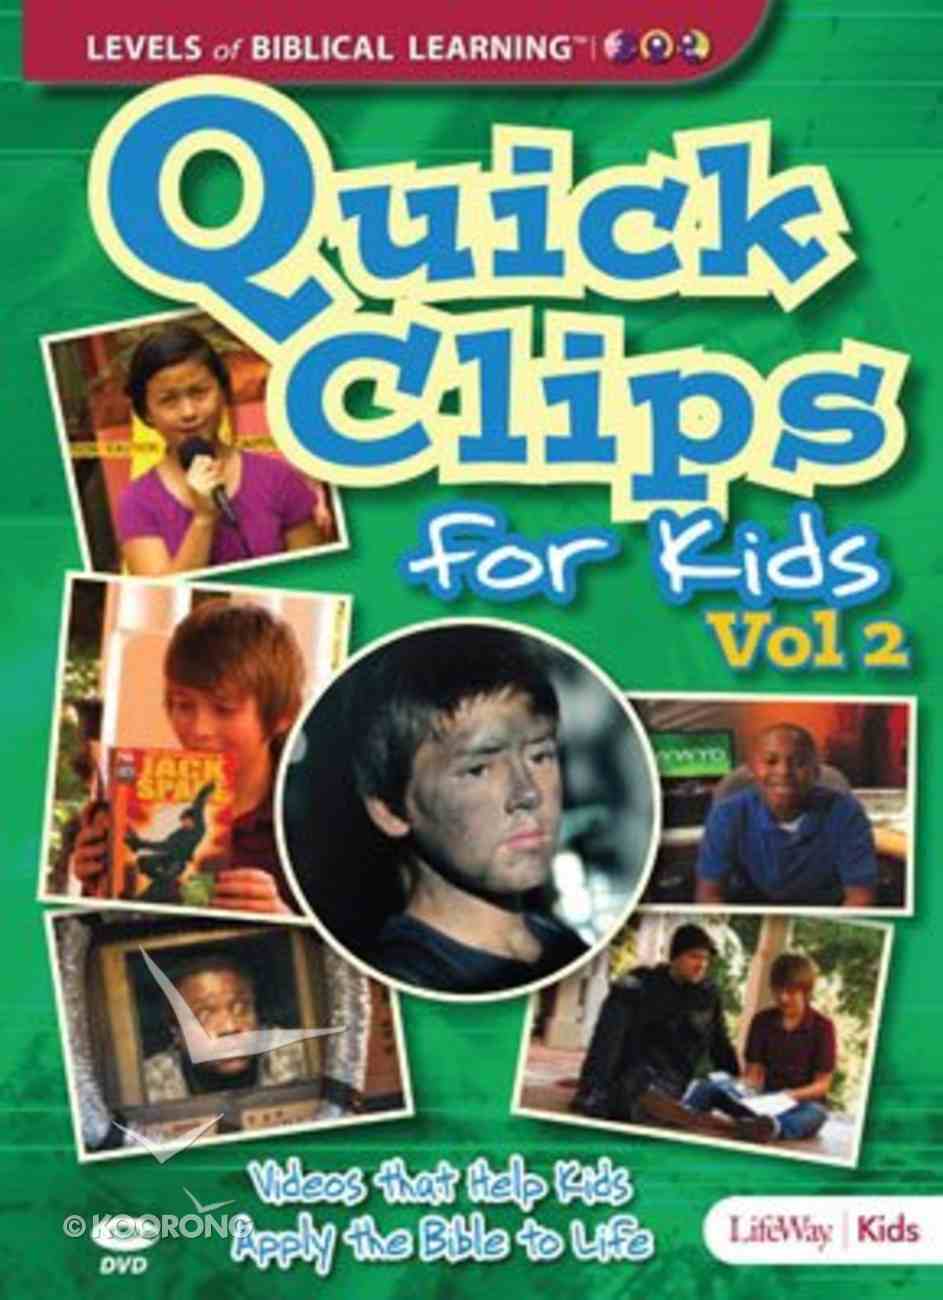 Quick Clips For Kids: Videos That Help Apply the Bible to Life Volume 2 DVD